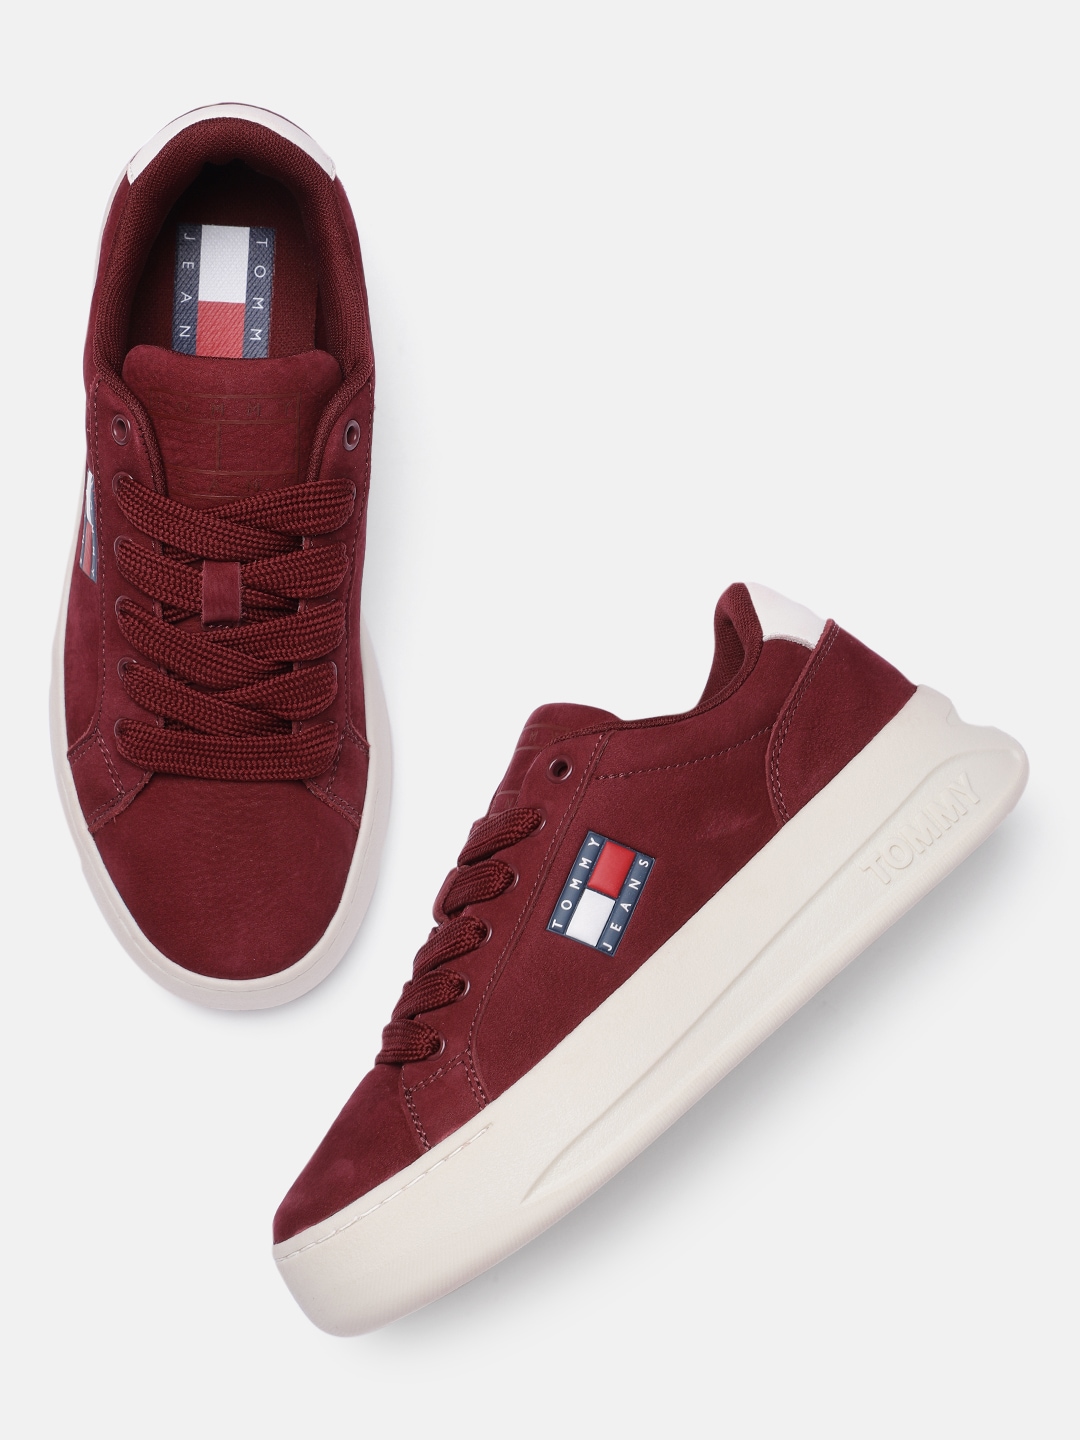 Tommy Hilfiger Women Burgundy Leather Sneakers Price in India